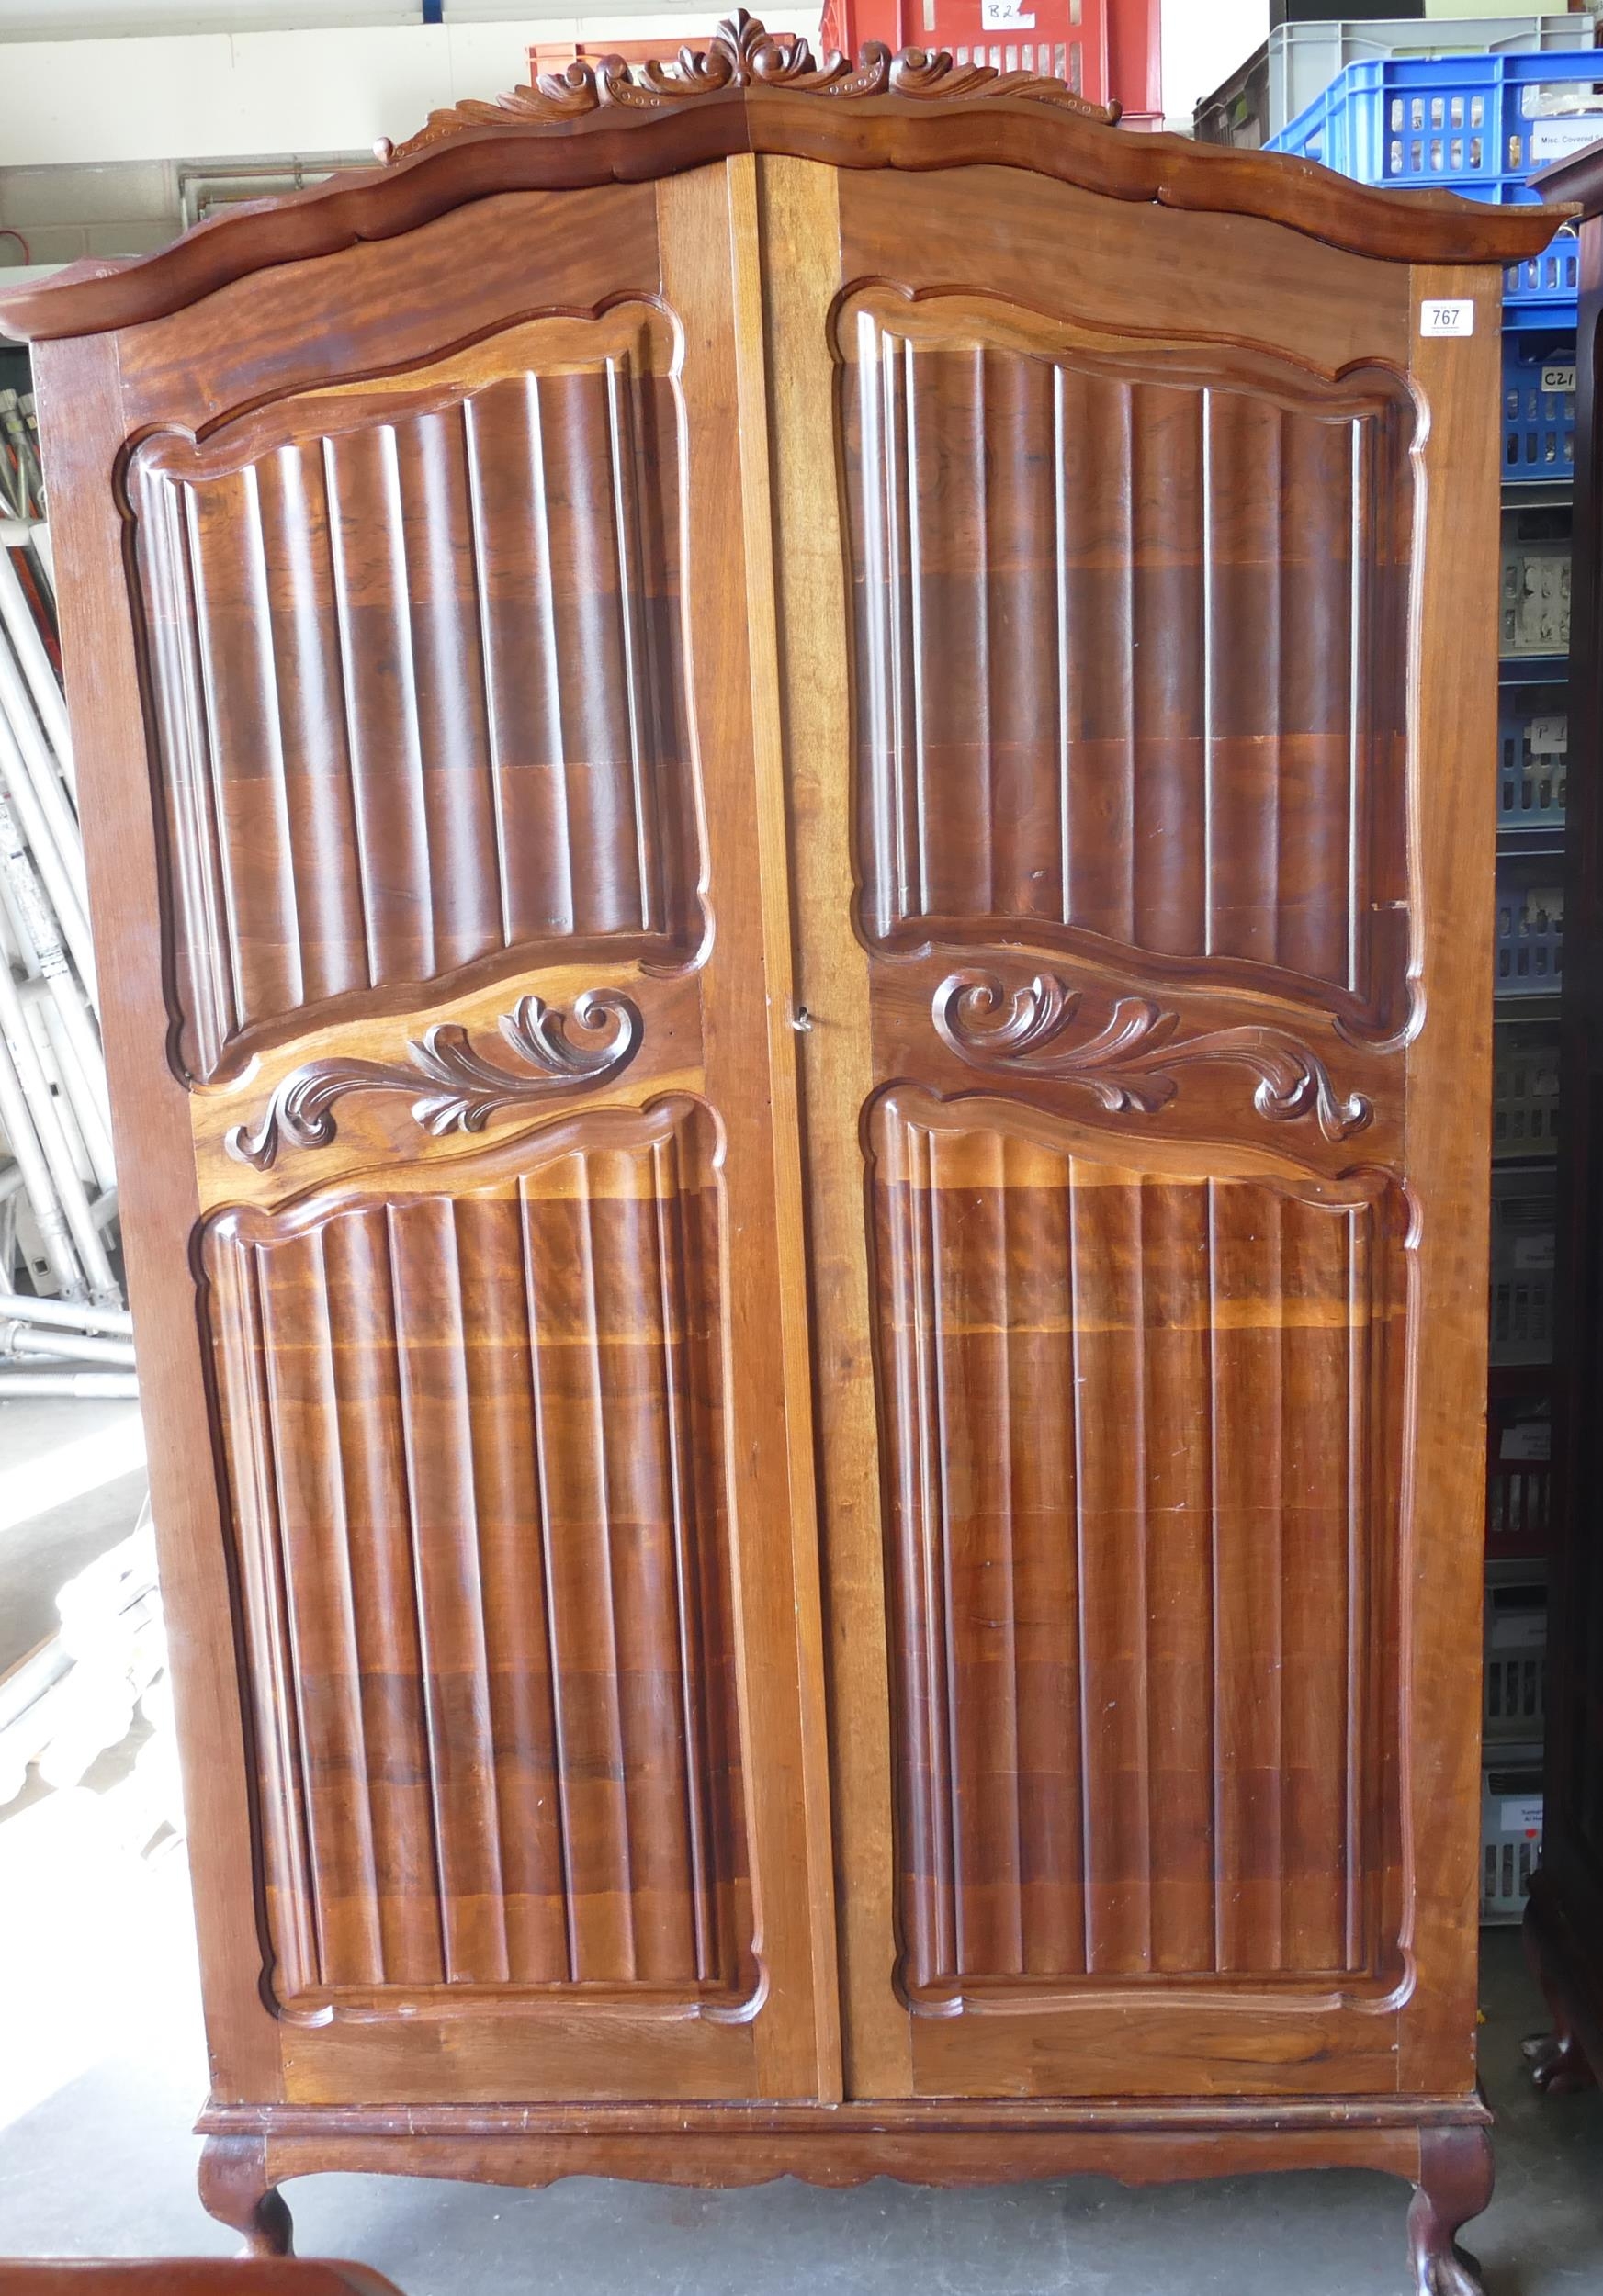 South African Hard Wood Carved Double Wardrobe on Ball & Claw Feet, sectional in 3 pieces, height